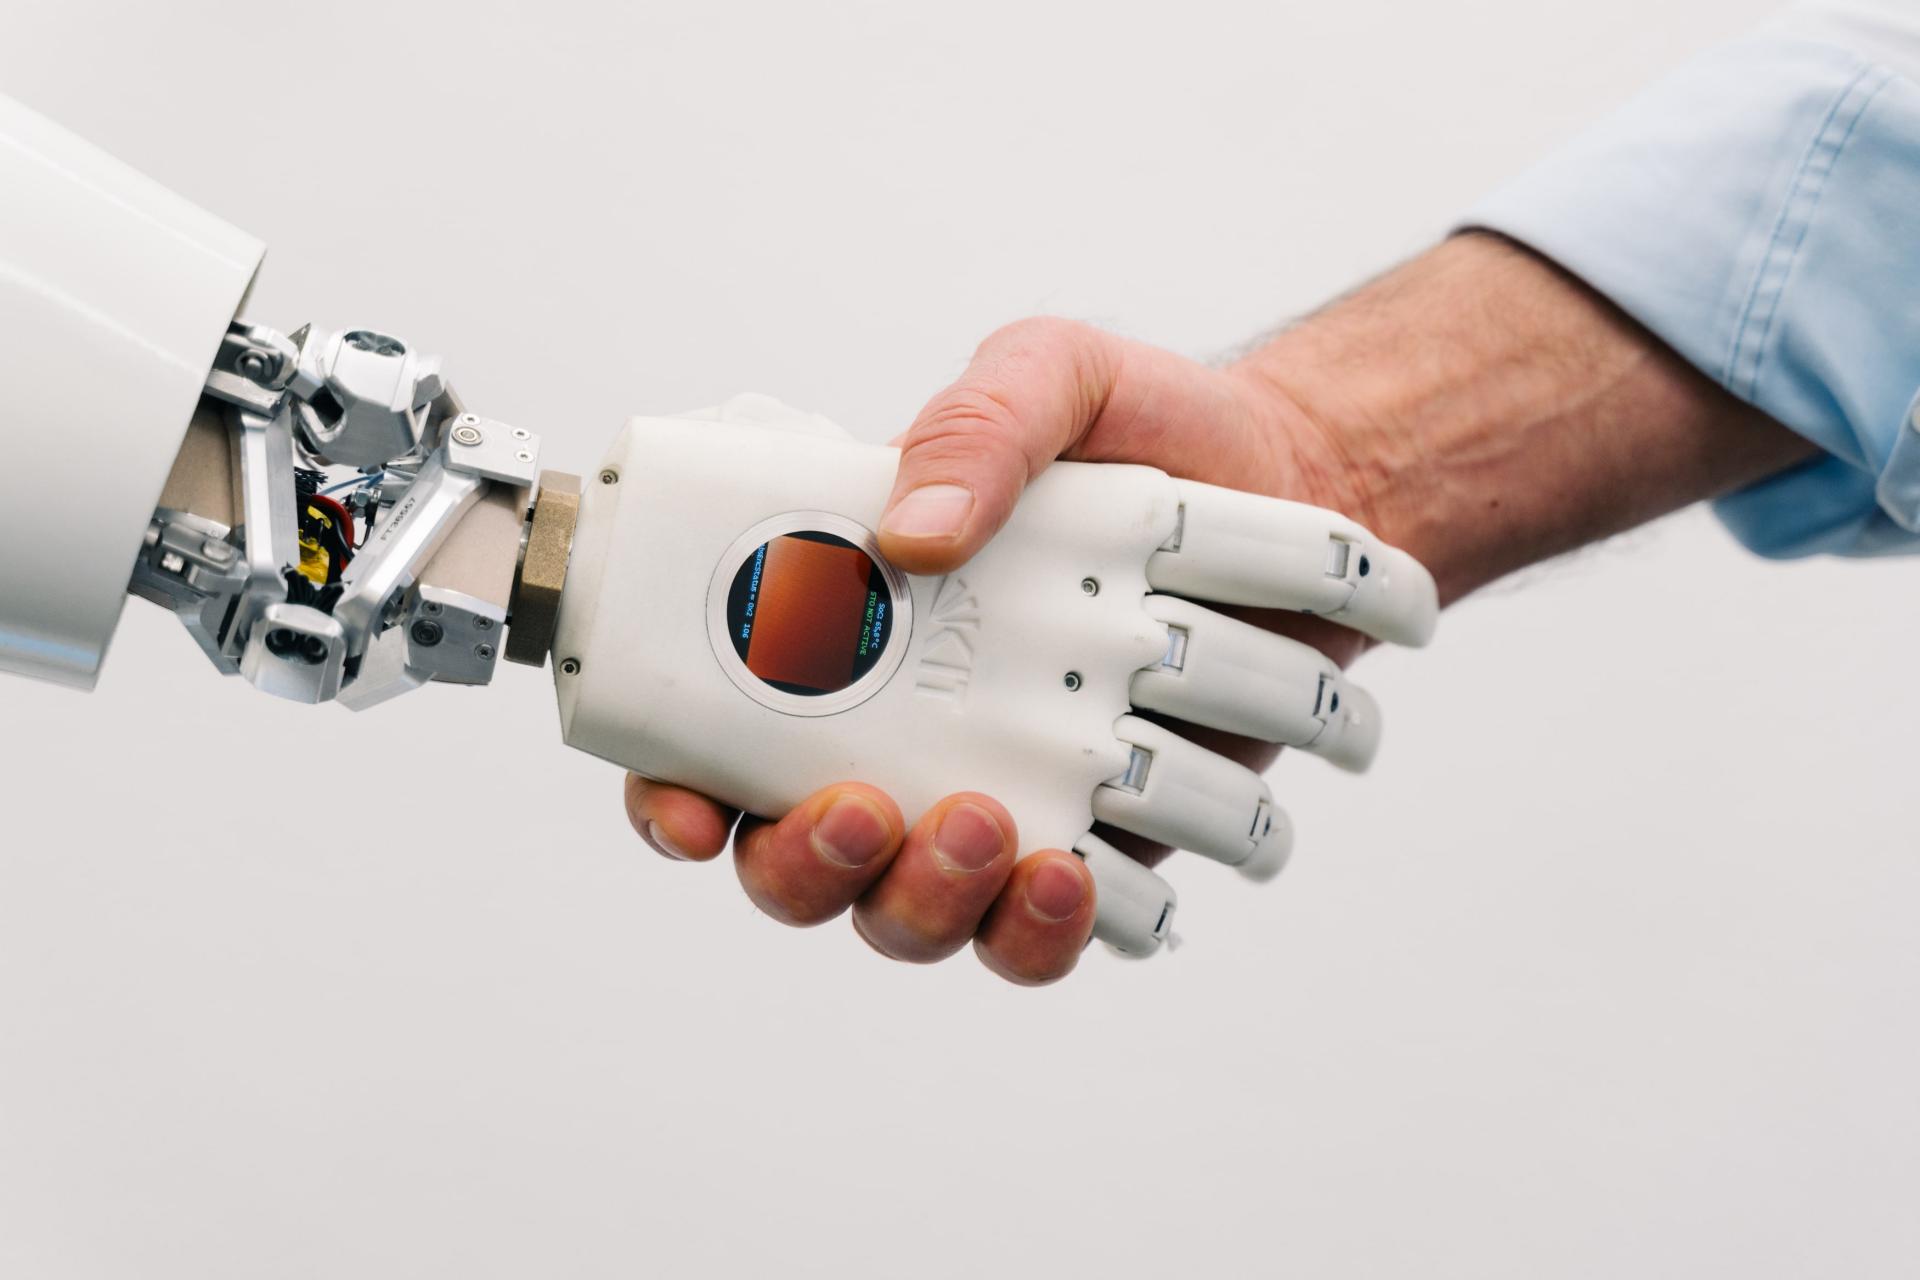 A robot shakes hands with a human